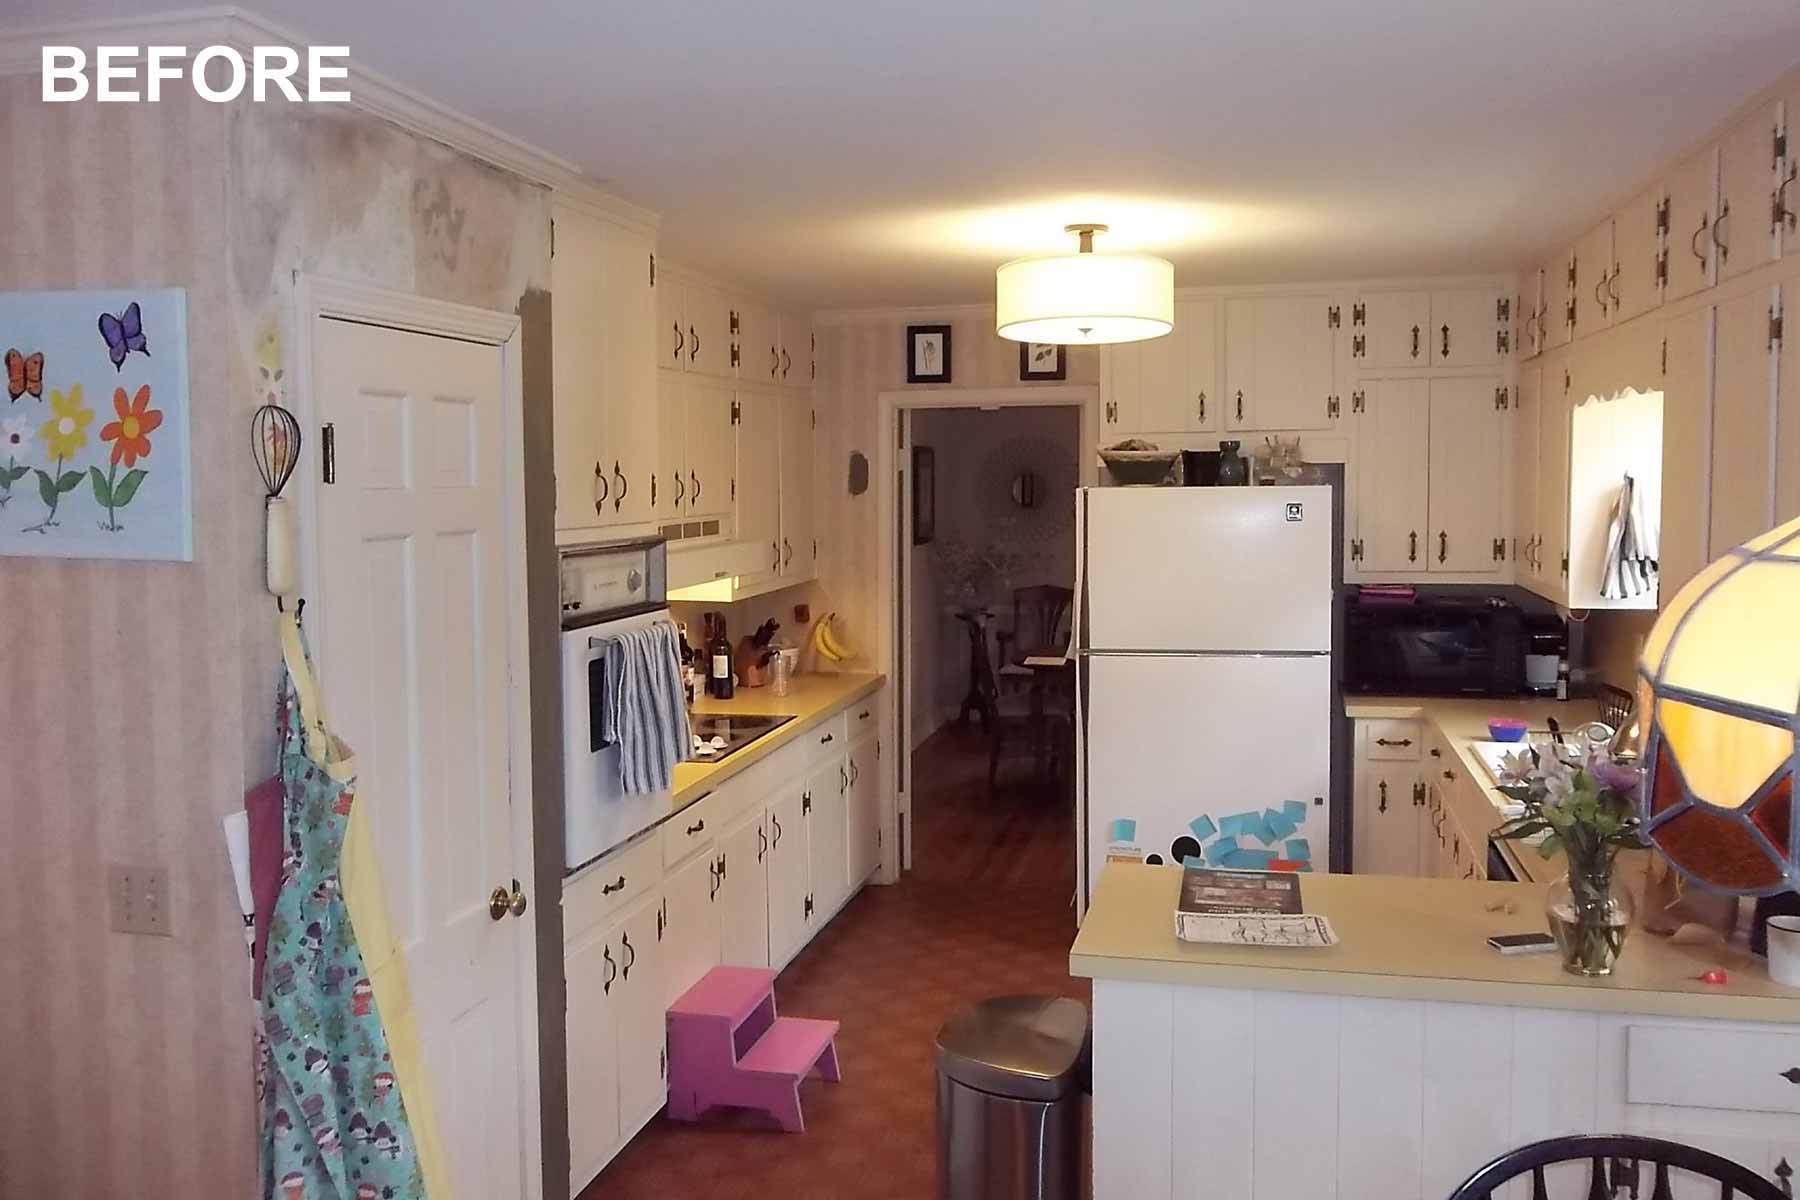 Full view of kitchen before remodeling